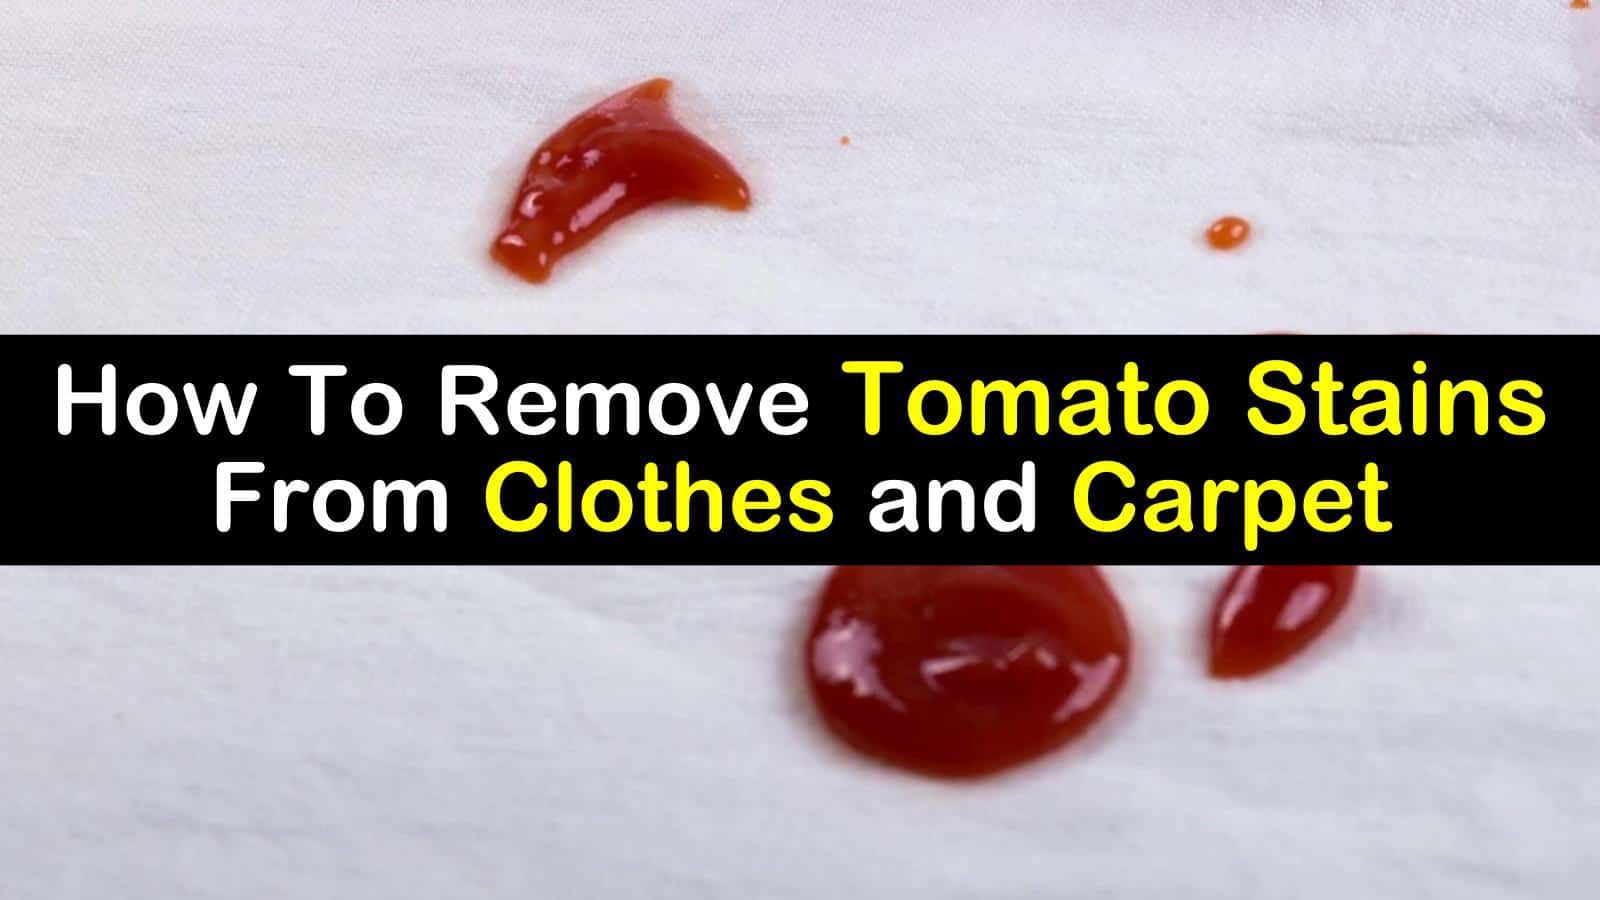 how to remove tomato stains titilimg1